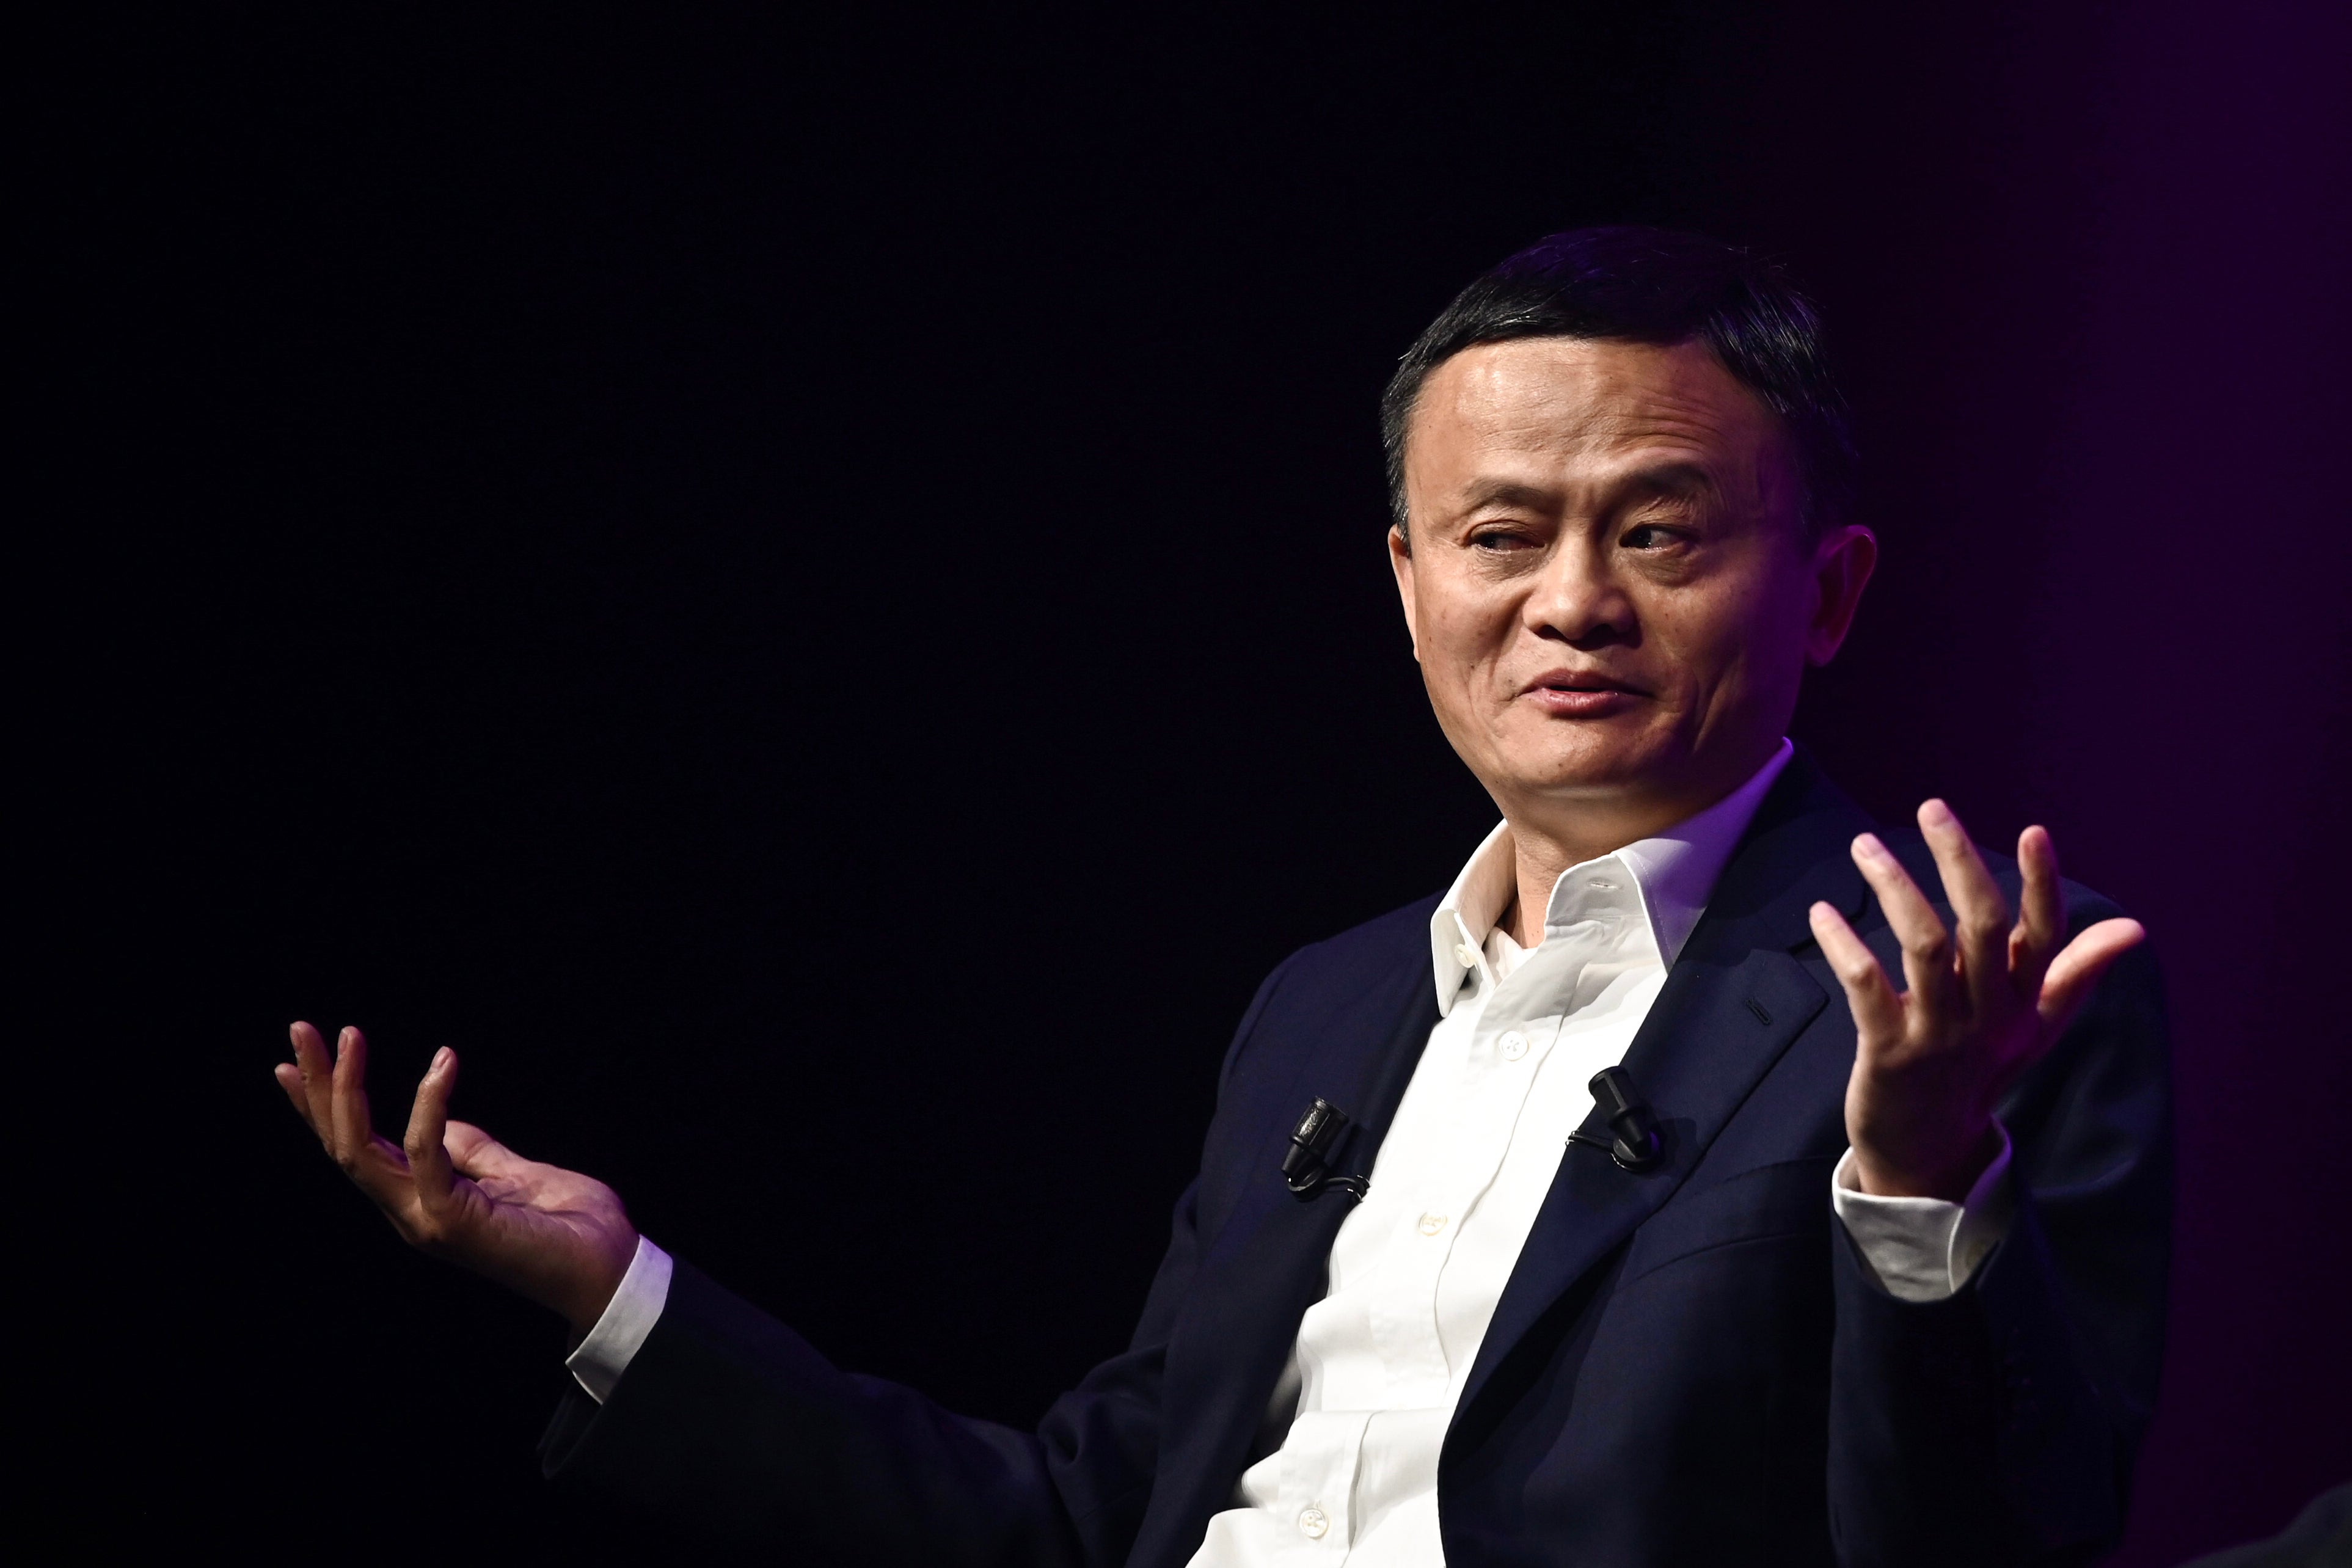 File photo: Jack Ma, CEO of Chinese e-commerce giant Alibaba, gestures as he speaks during his visit at the Vivatech startups and innovation fair, in Paris on 16 May 2019